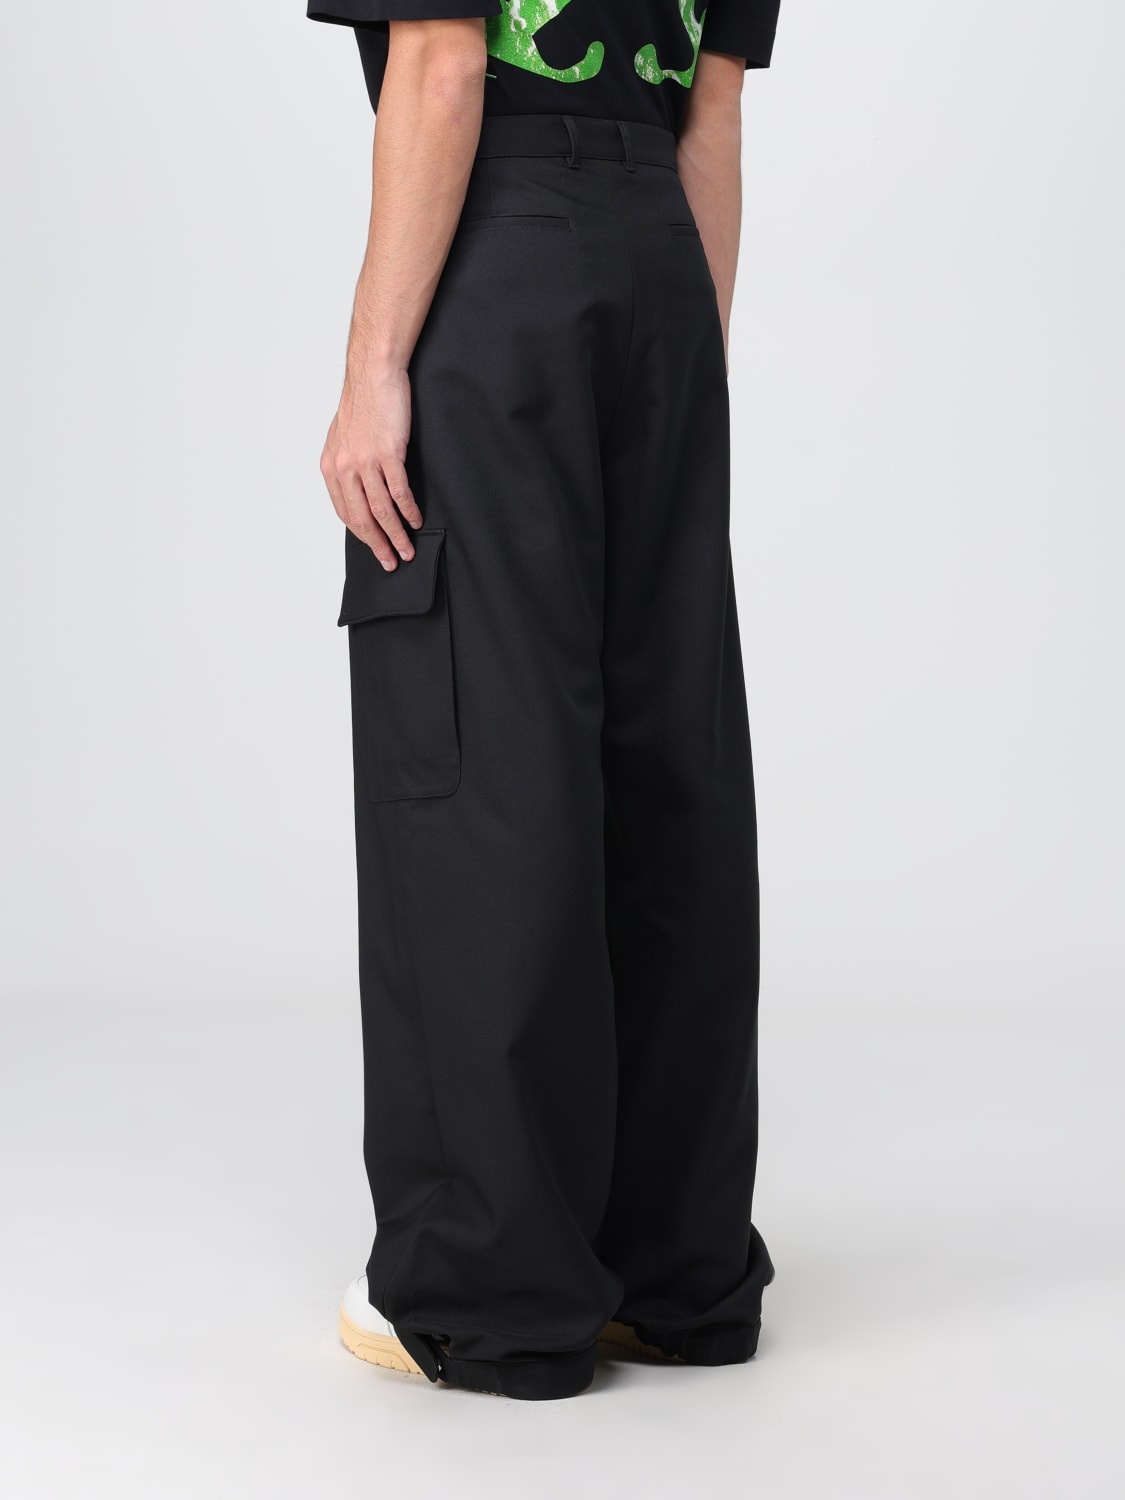 OFF-WHITE: pants for man - Black | Off-White pants OMCF037F23FAB004 ...